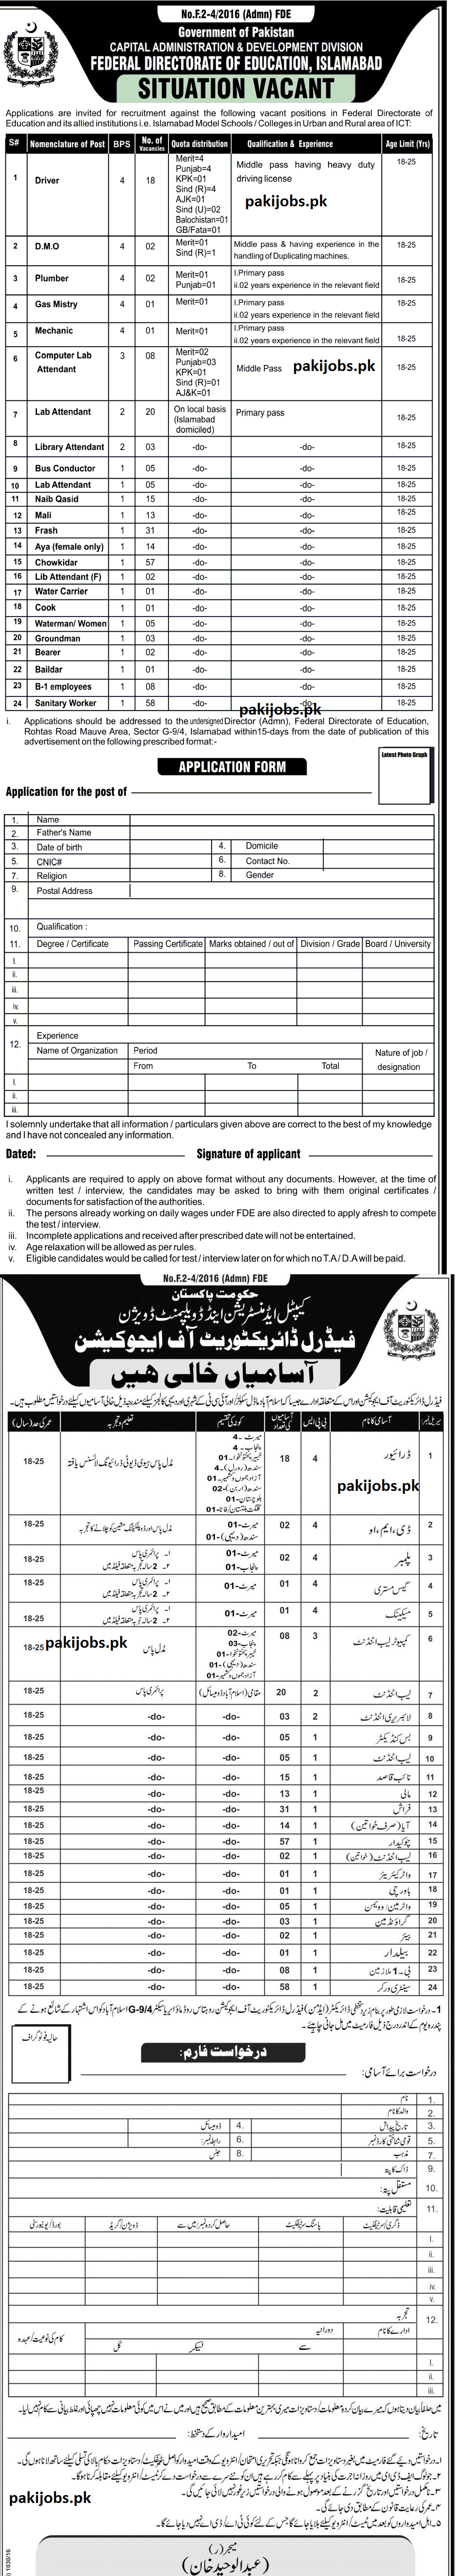 Federal Directorate of Education Jobs 2023 Application Form September Advertisements